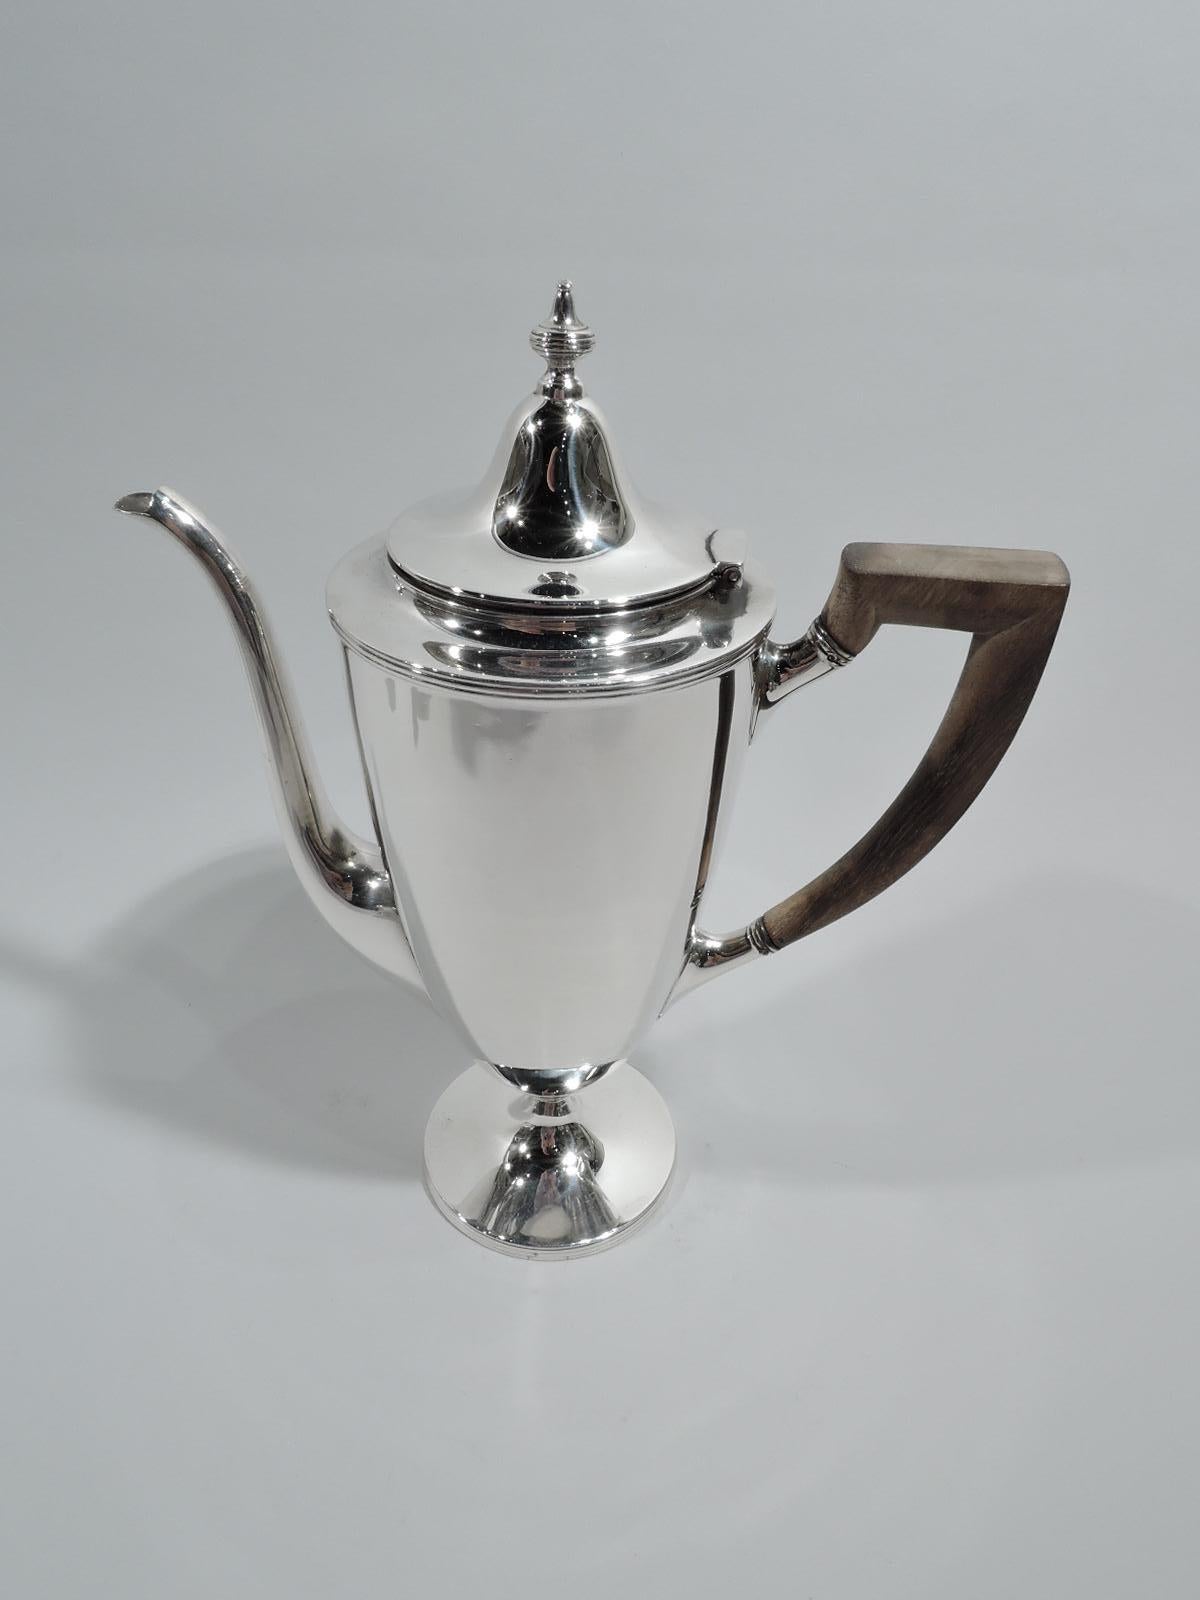 Edwardian classical sterling silver coffee set. Made by Tiffany & Co. in New York, ca 1907. This comprises coffeepot, creamer, and sugar. Coffeepot: Tapering body on raised foot, hinged and domed cover with vasiform finial, vertical s-scroll spout,